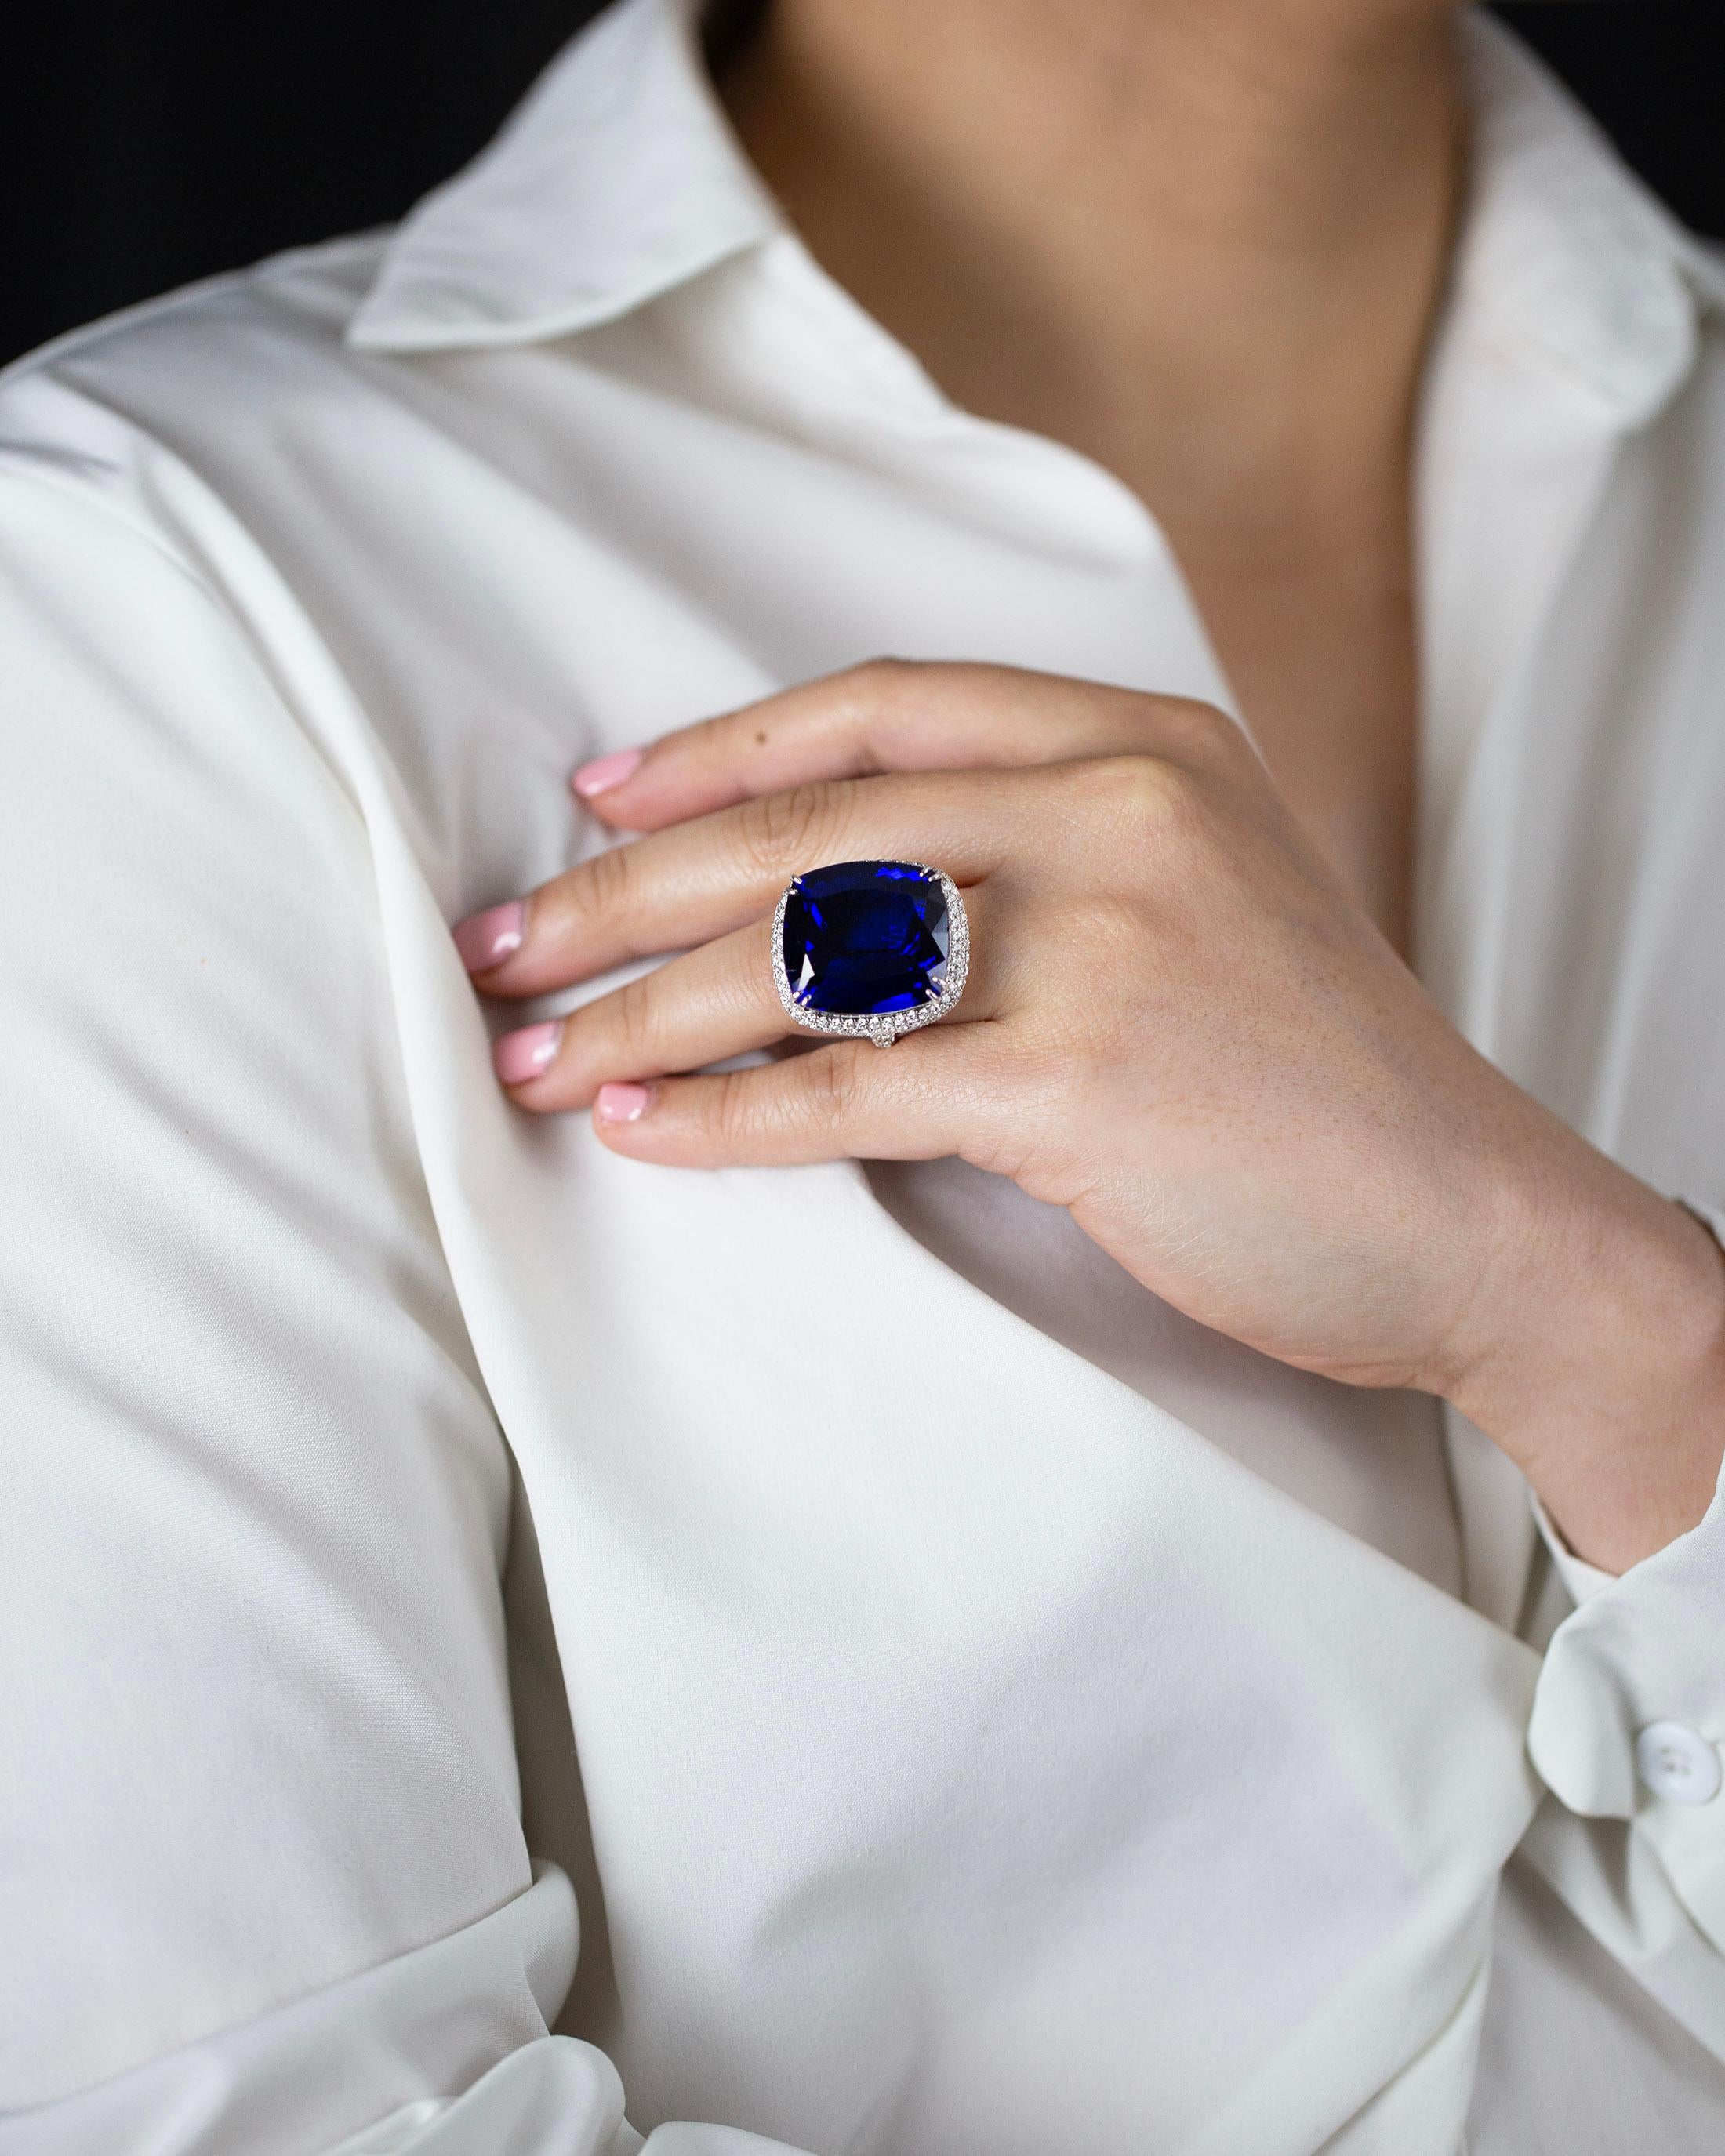 Roman Malakov 44.04 Carats Total Cushion Cut Tanzanite & Diamonds Cocktail Ring In New Condition For Sale In New York, NY